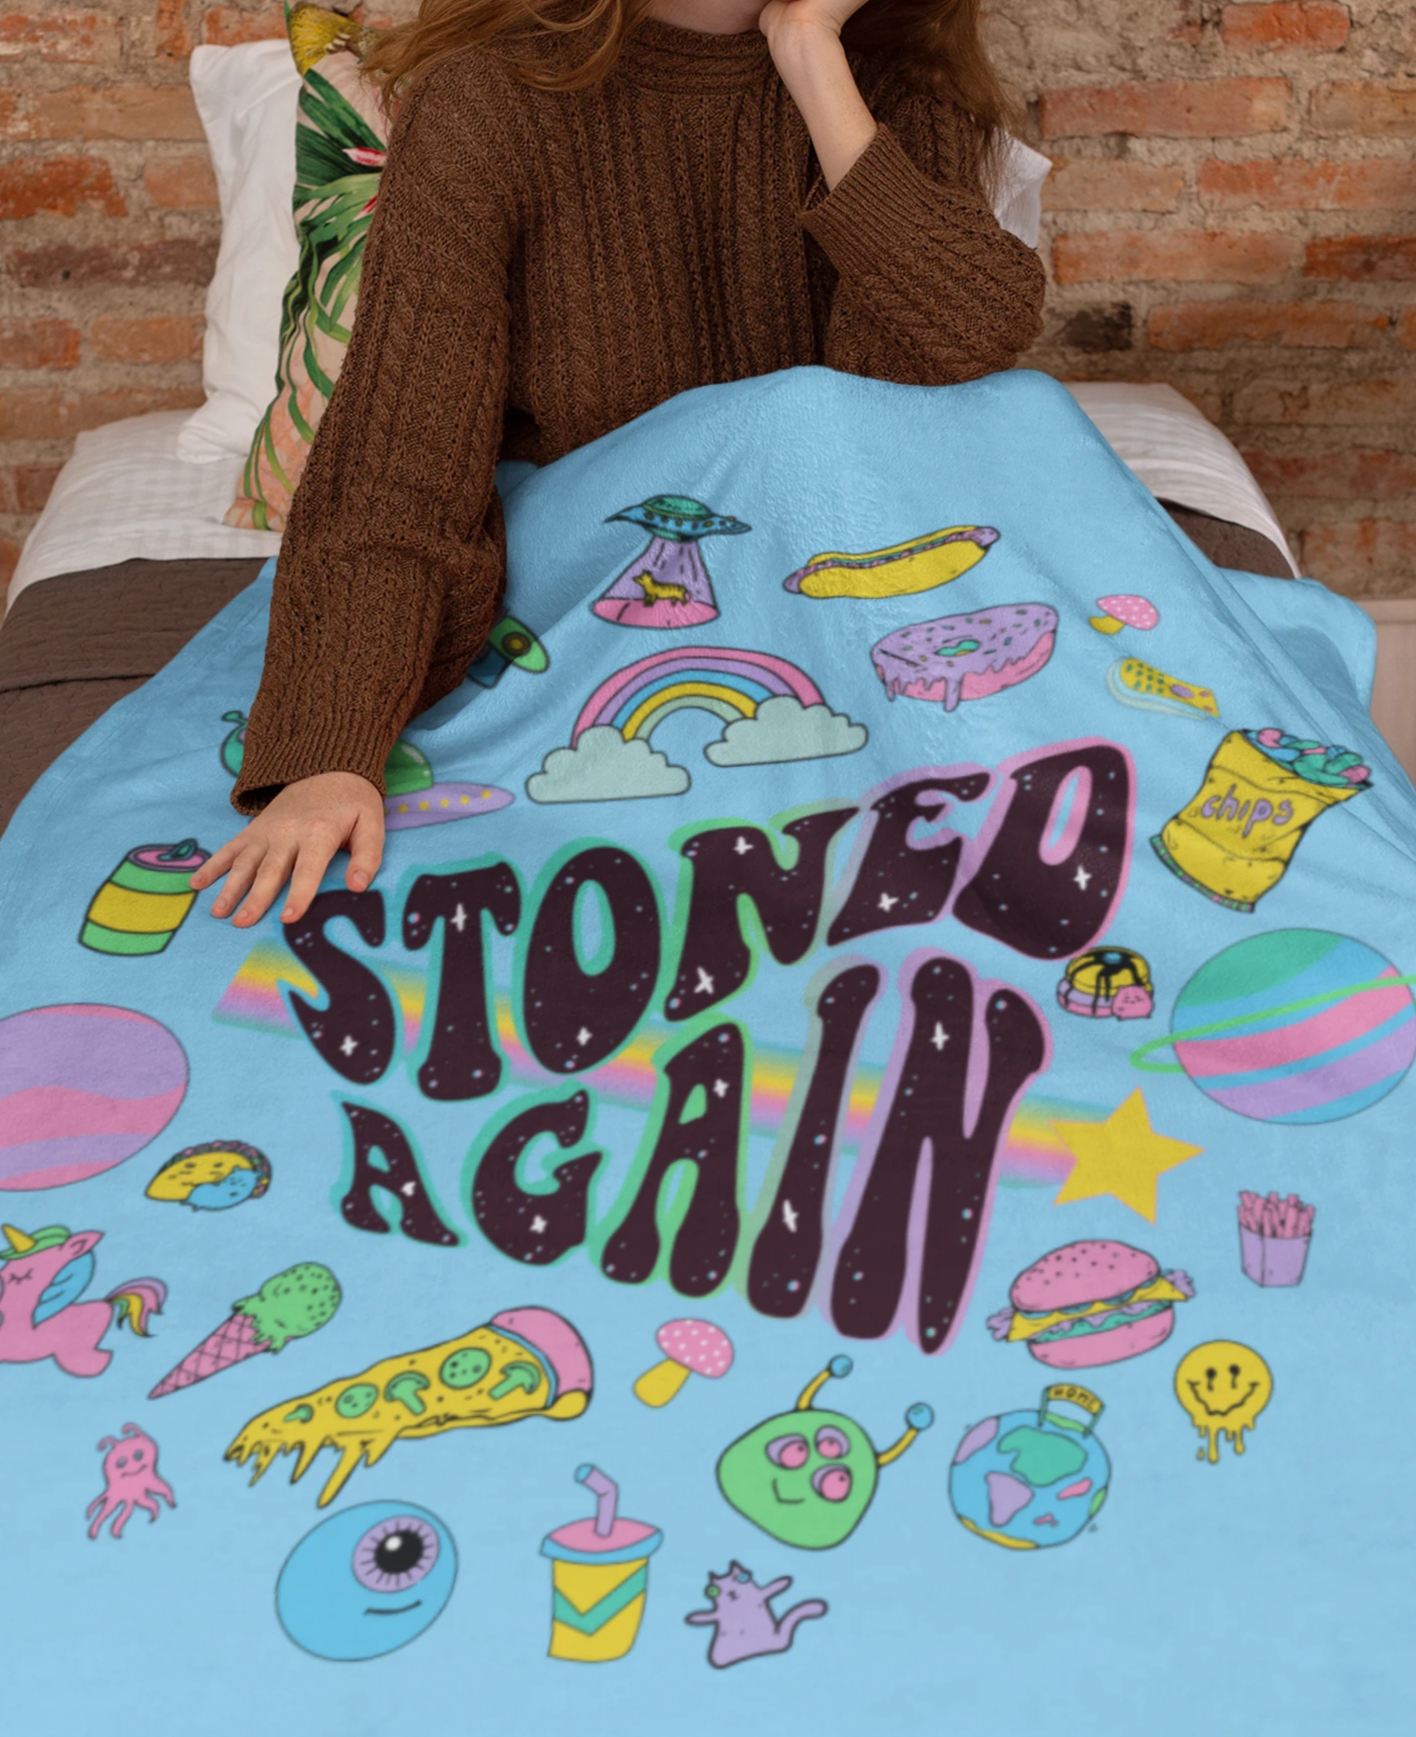 Light blue blanket with stoner weed art work saying stoned again - HighCiti